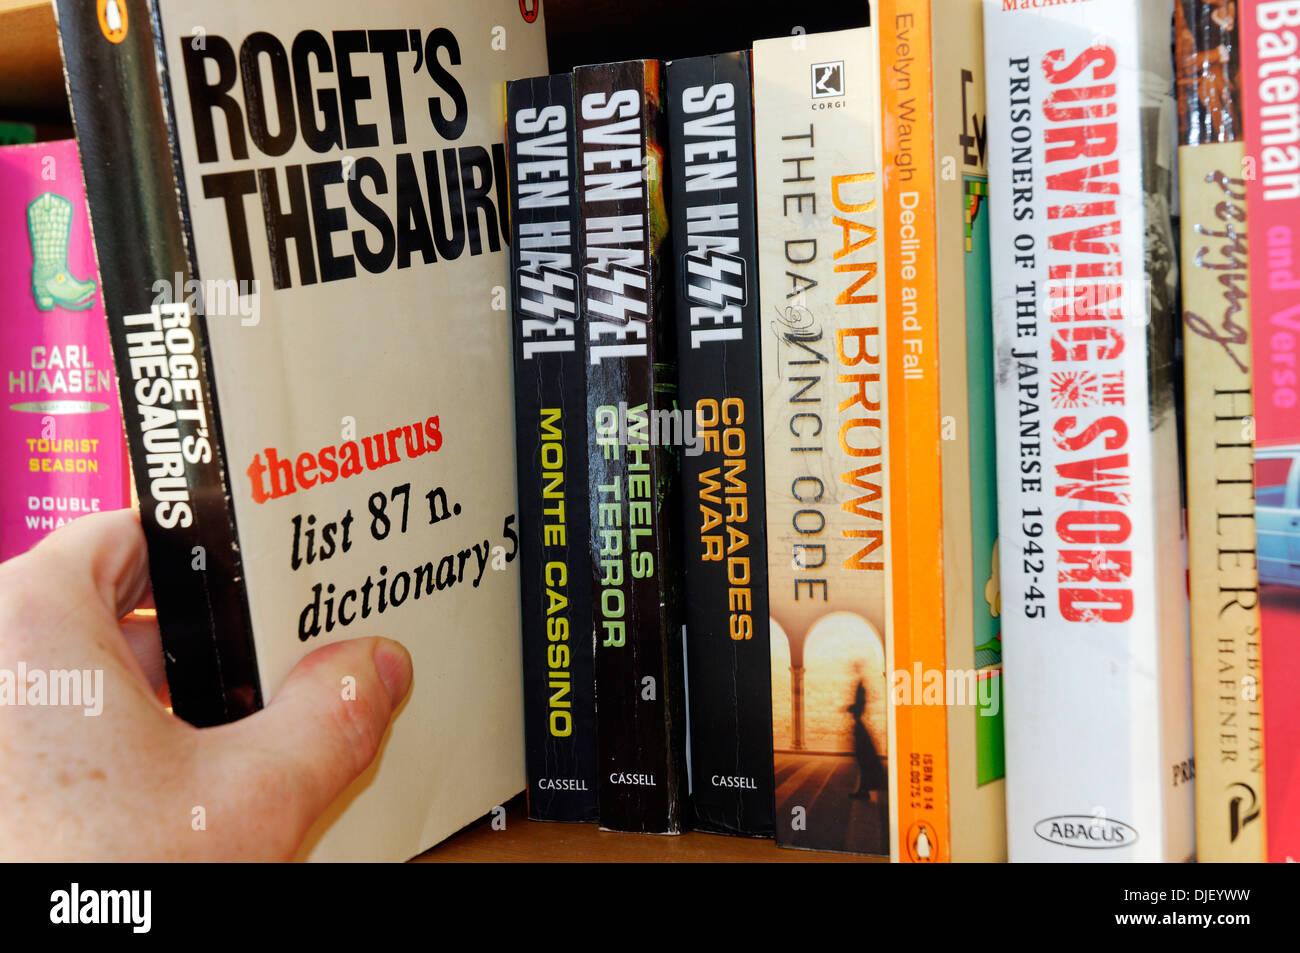 A hand taking Roget's Thesaurus from a bookshelf Stock Photo